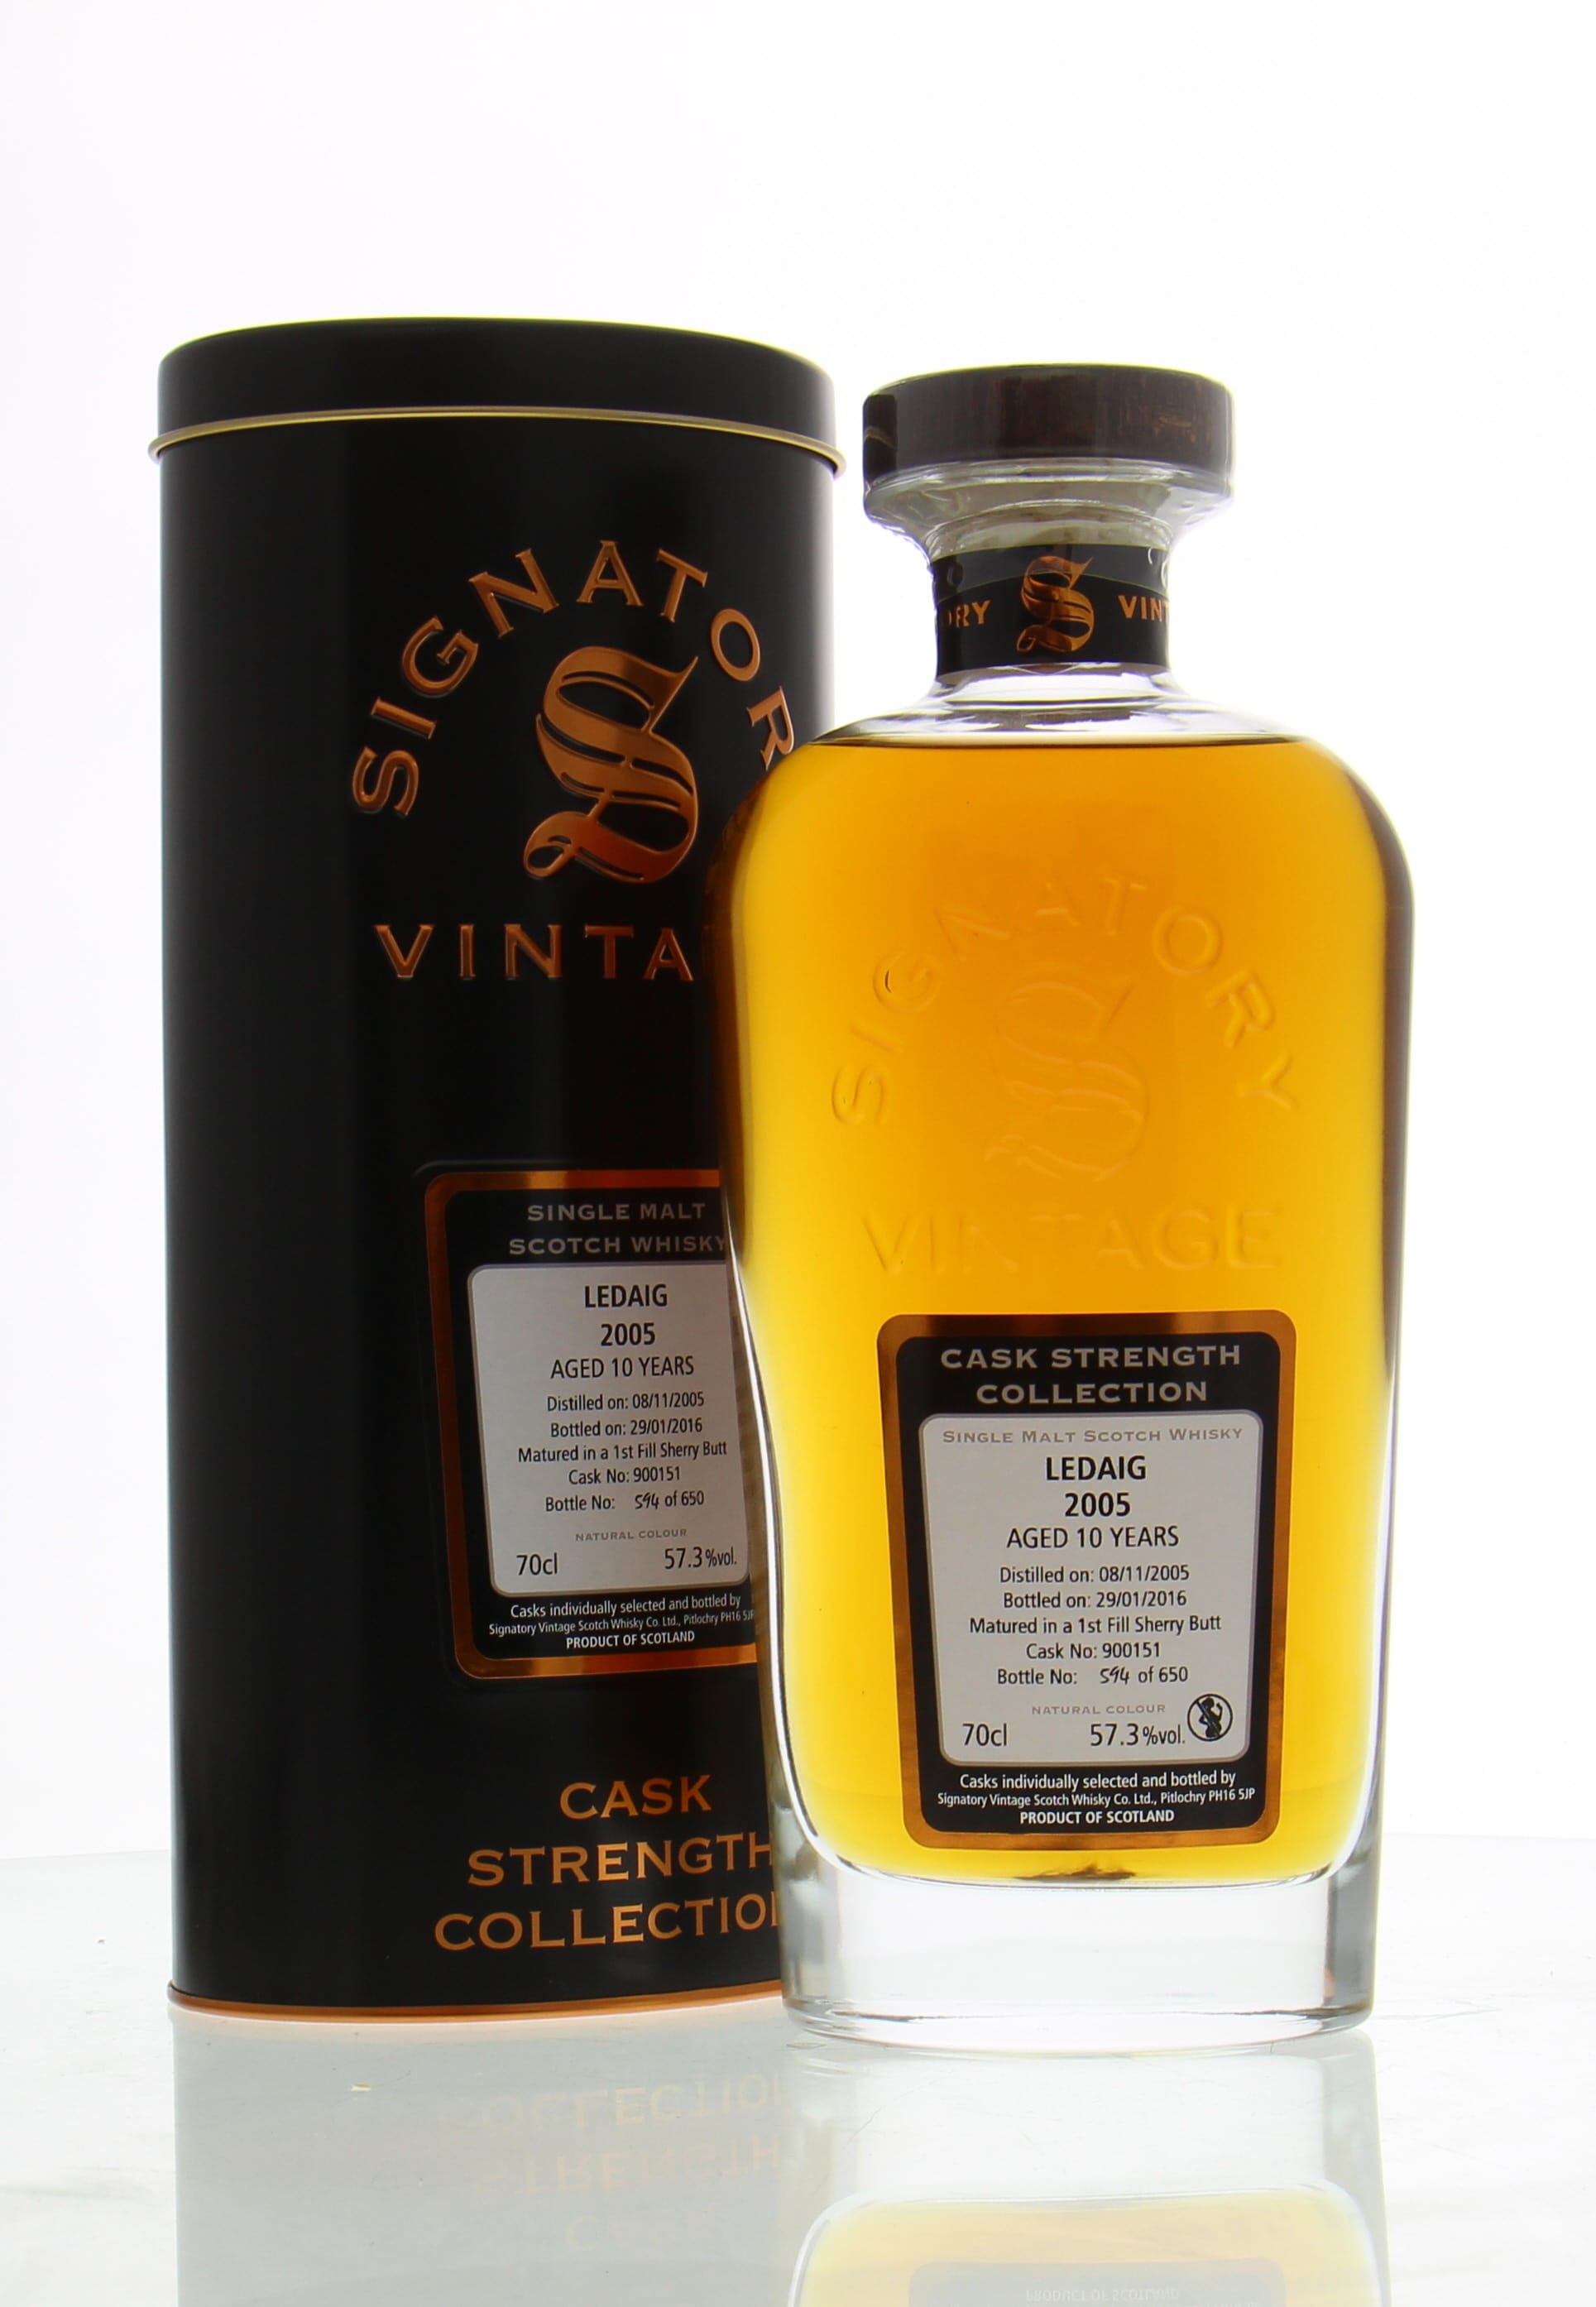 Ledaig - 10 Years Old Signatory Vintage Cask:900151 57.3% 2005 In Original Container